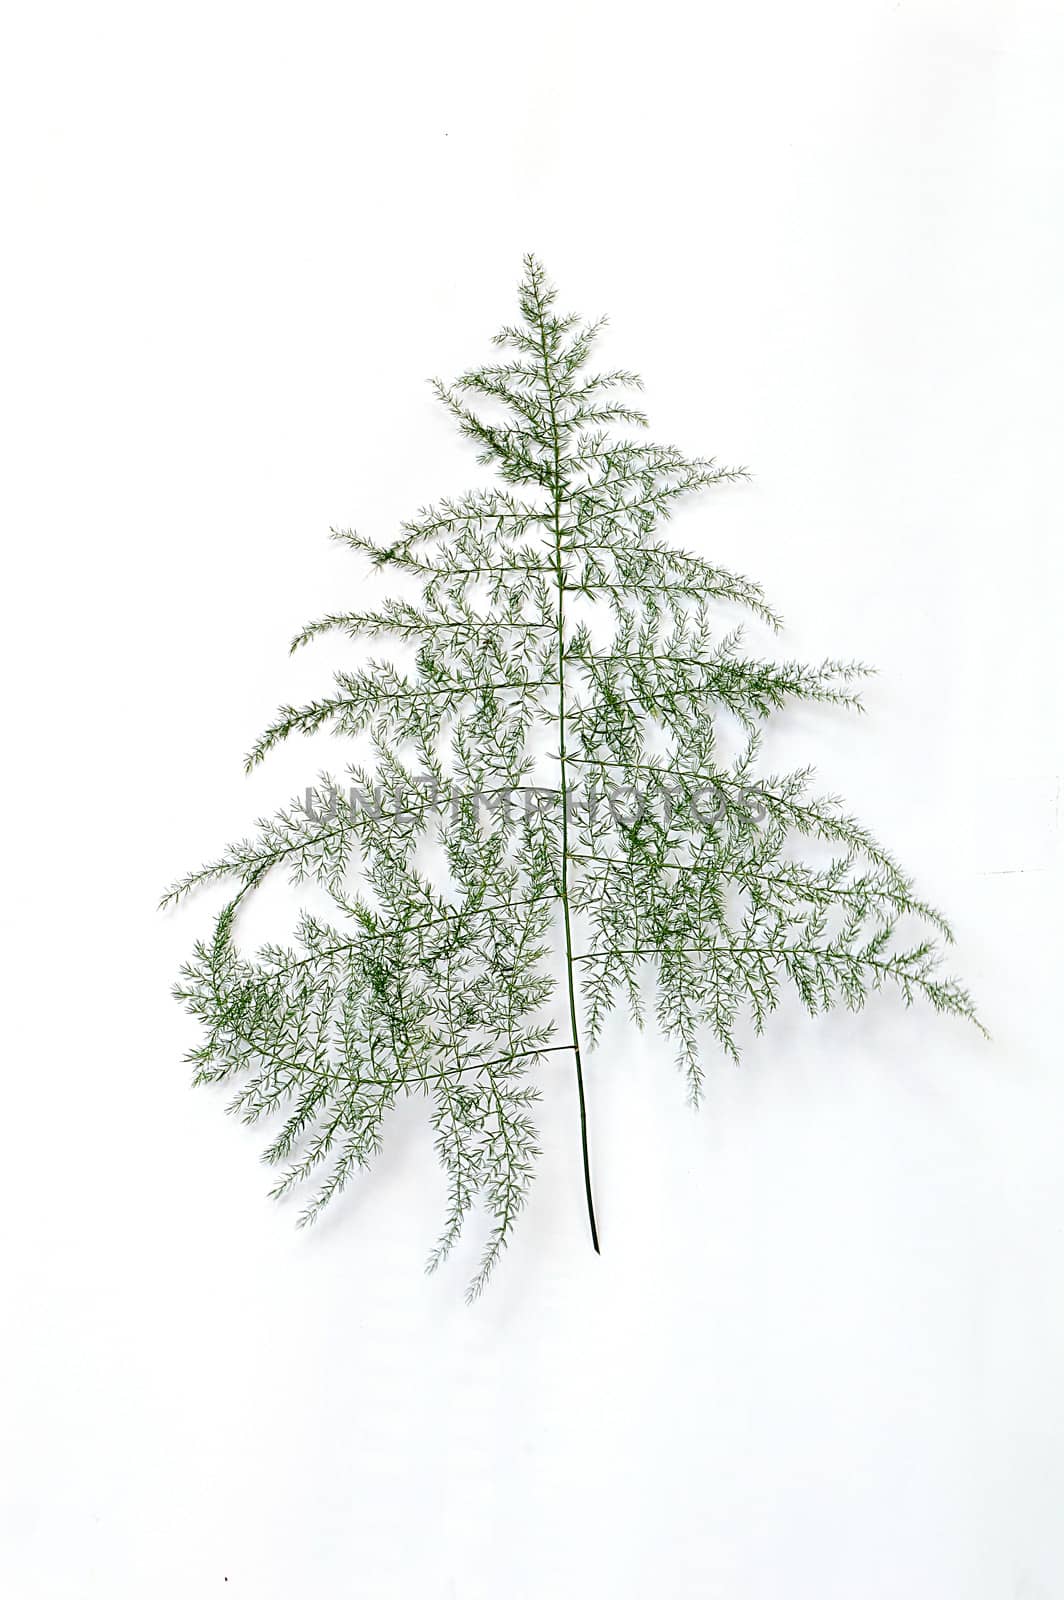 green fern leaf isolated on a white background